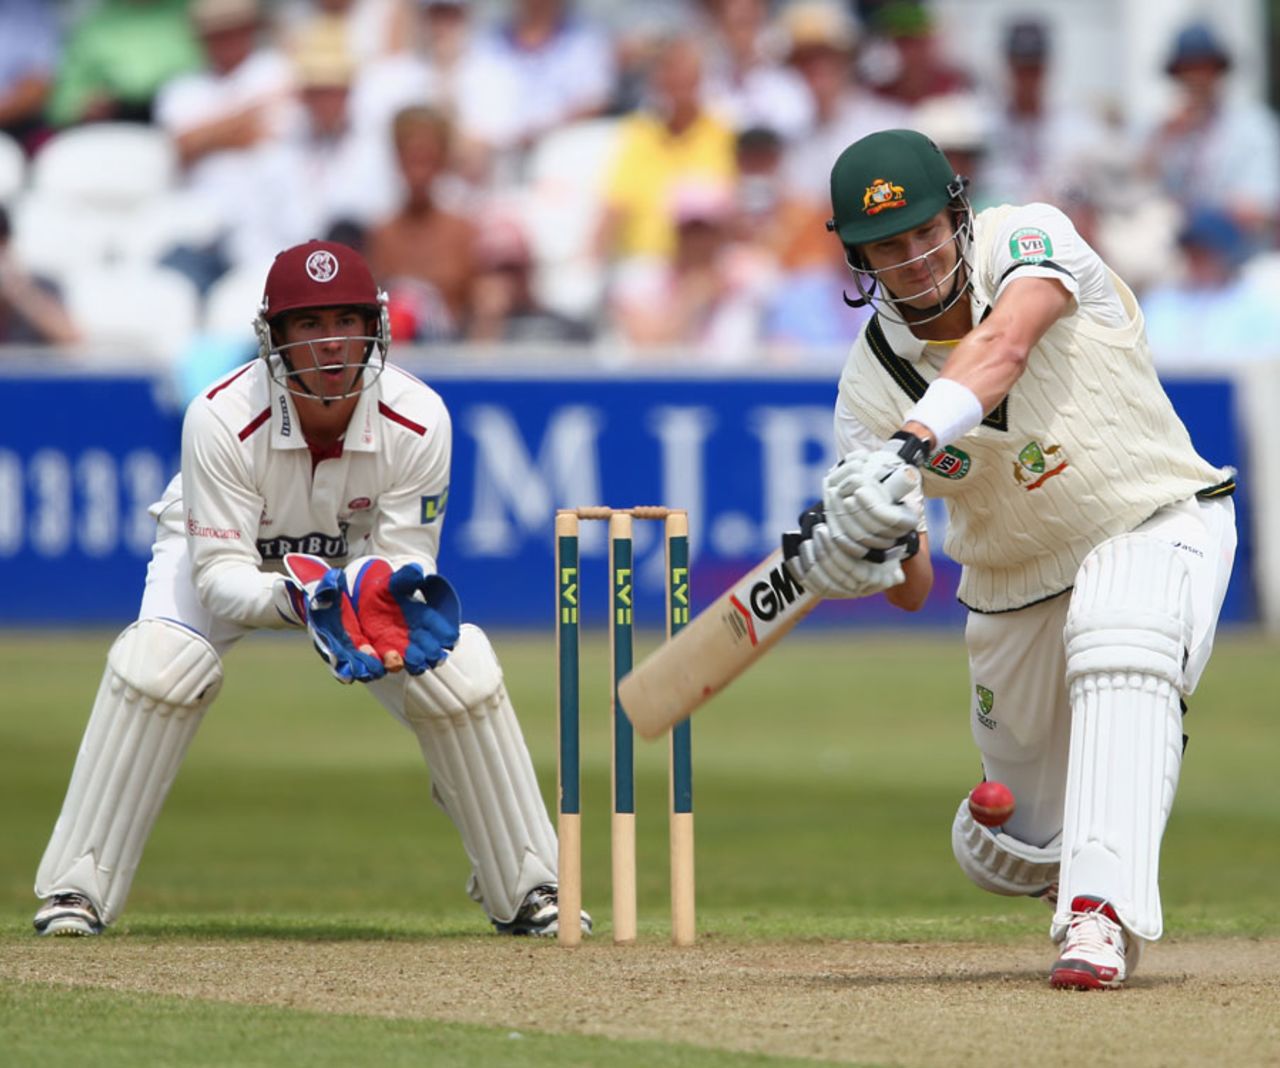 Shane Watson about to play a drive, Somerset v Australians, Taunton, 2nd day, June 27, 2013